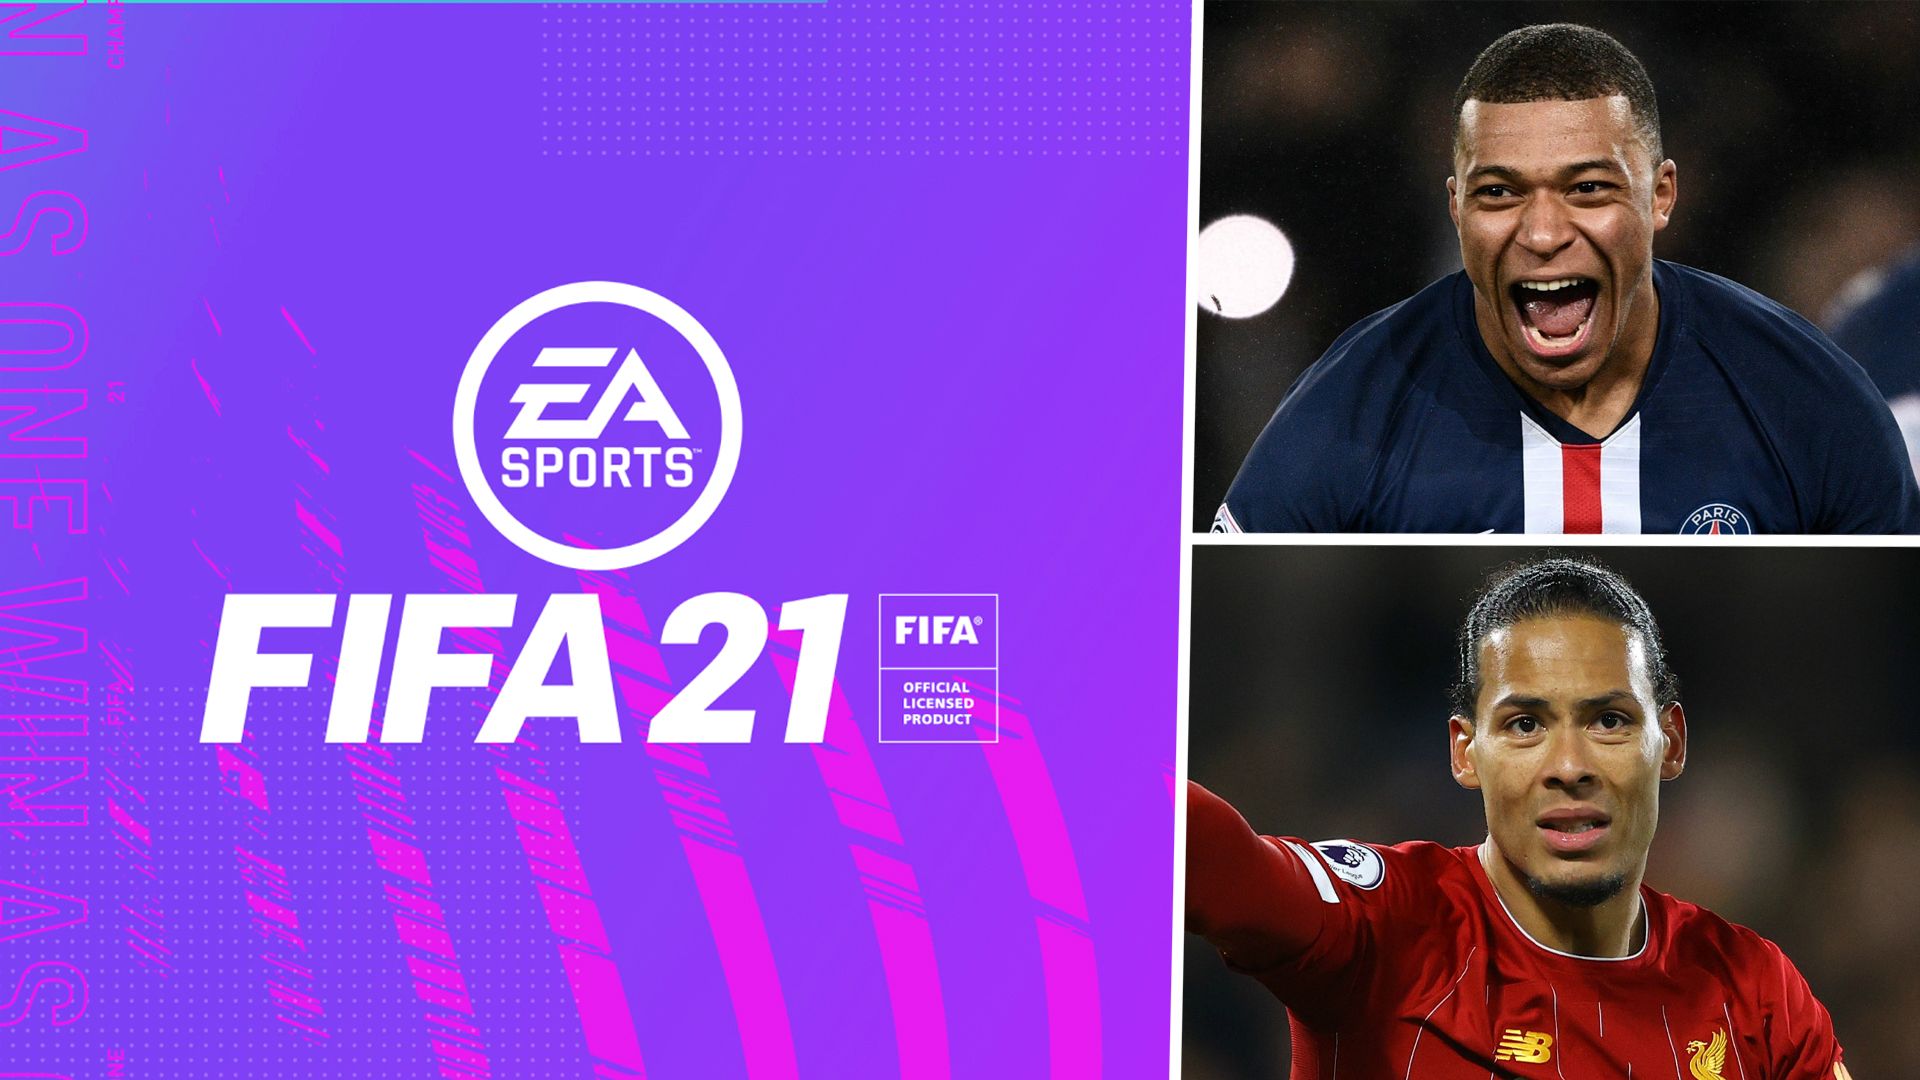 FIFA 21 cover star: Who will be the face of EA Sports' new game